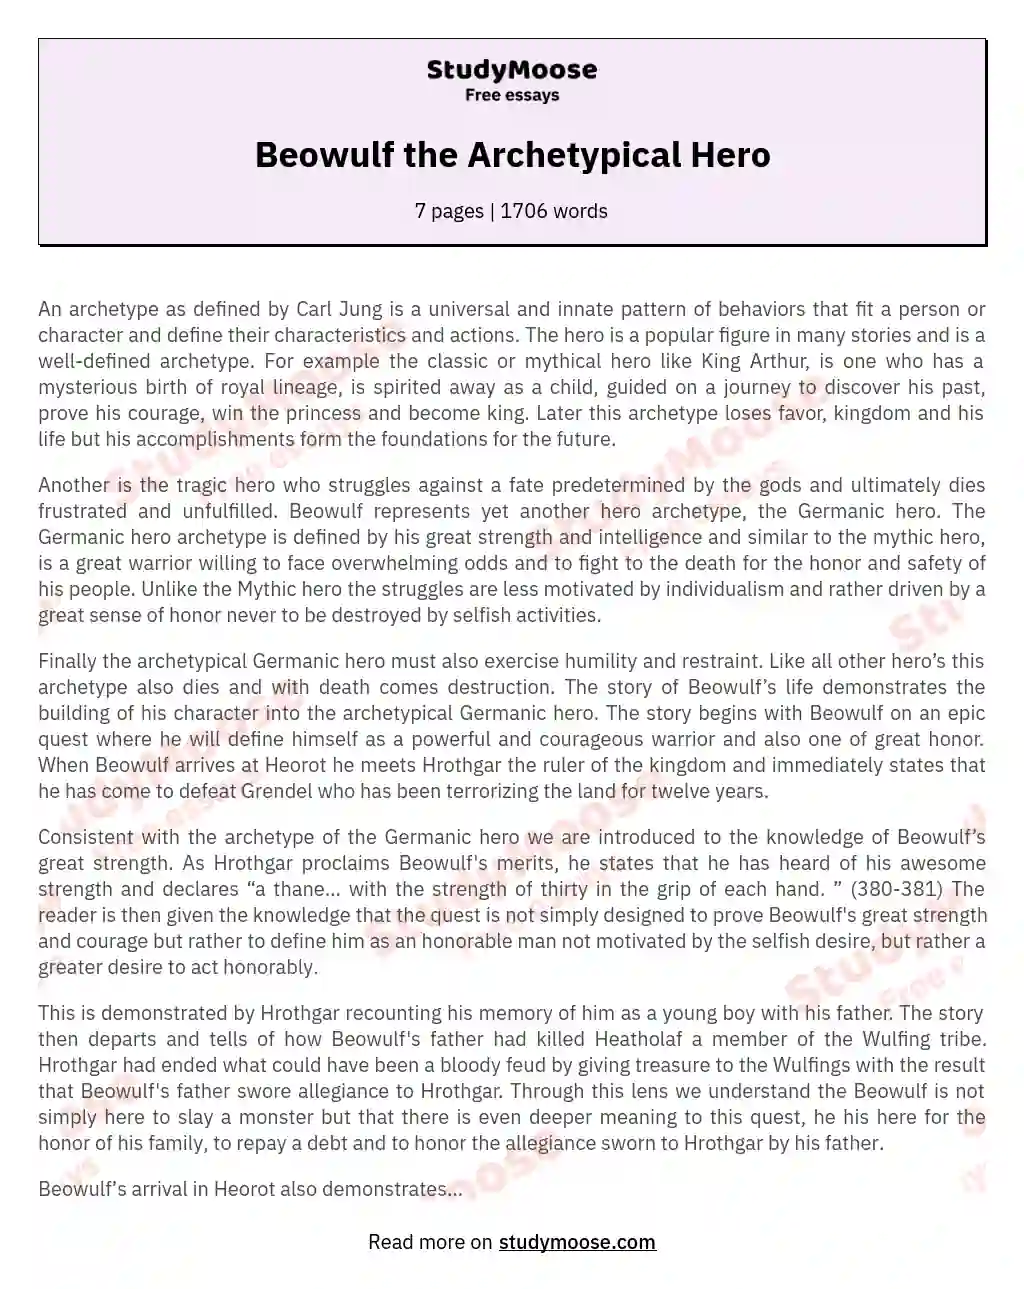 Beowulf the Archetypical Hero essay